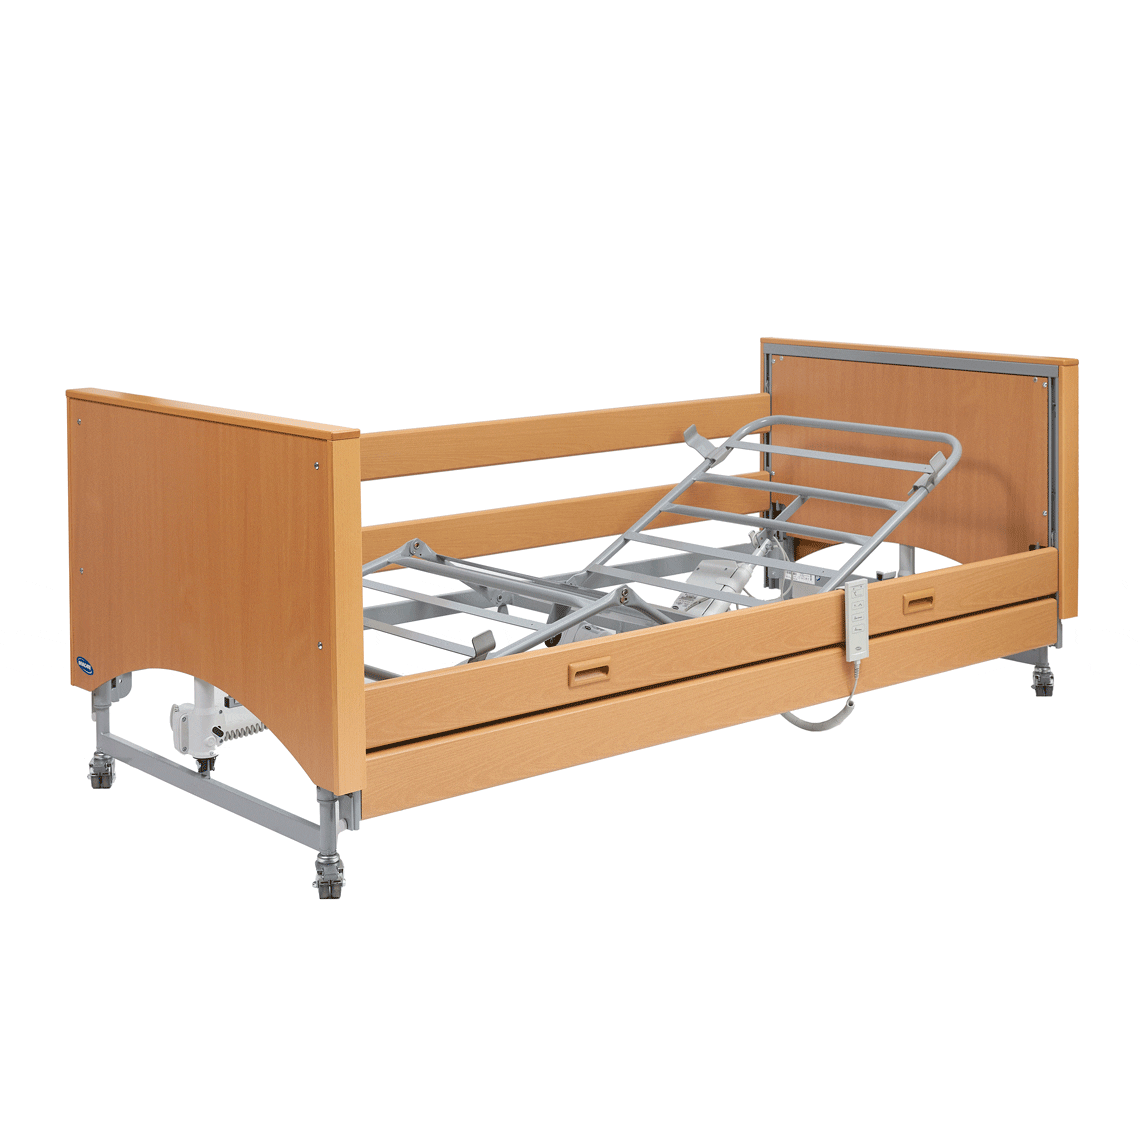 Hanley Select 4 Section Low Profiling Bed